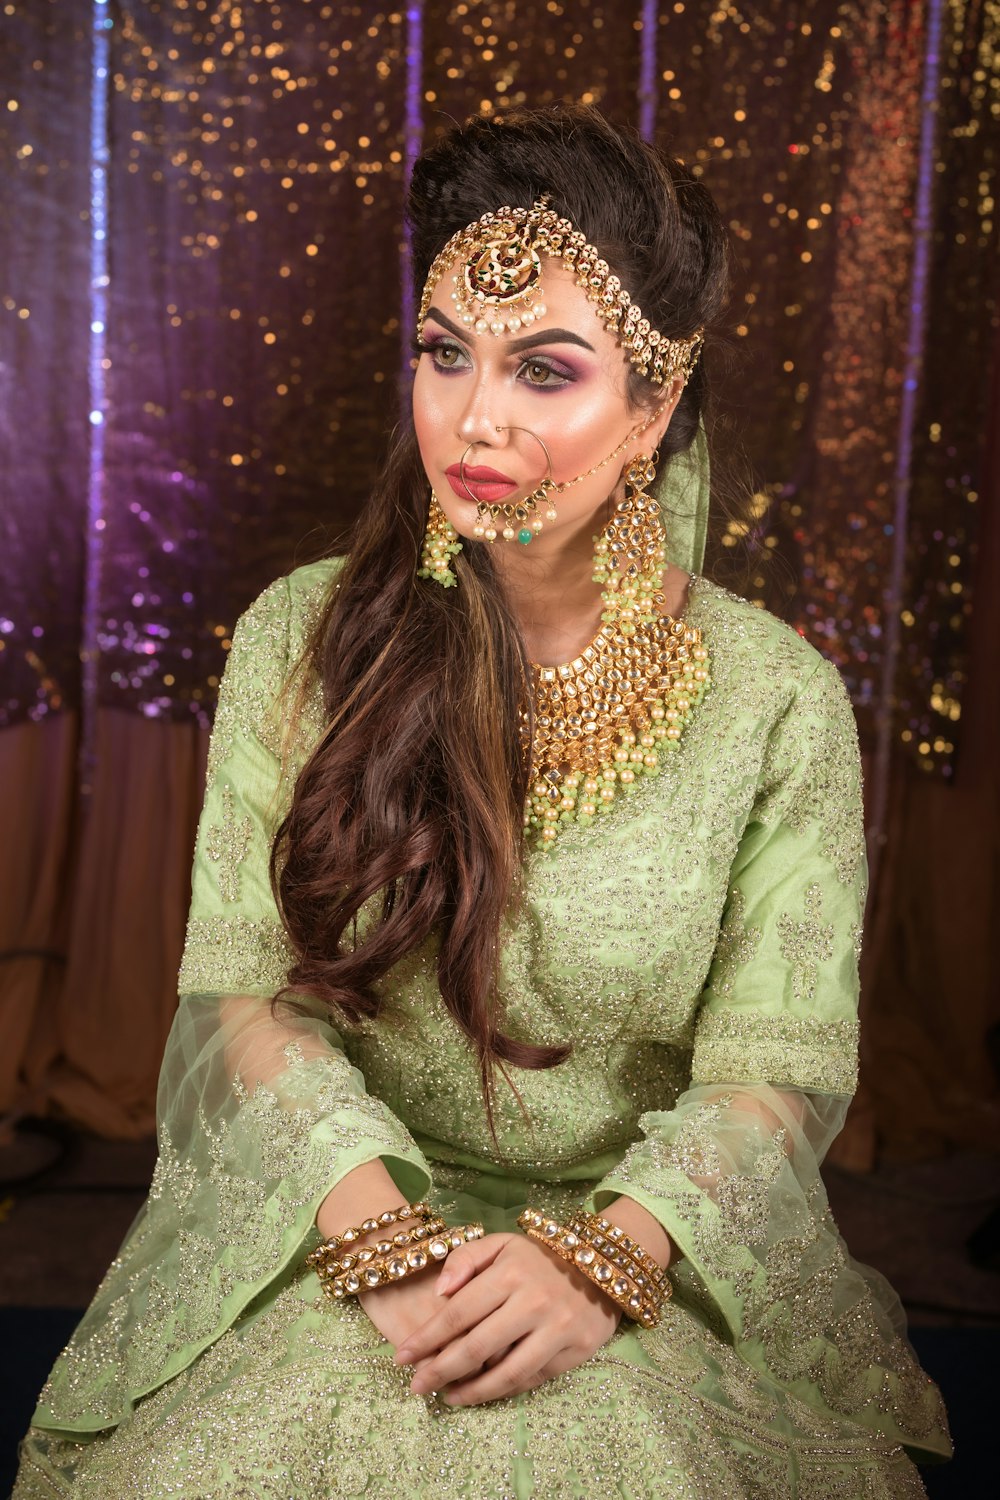 a woman wearing a green outfit and jewelry